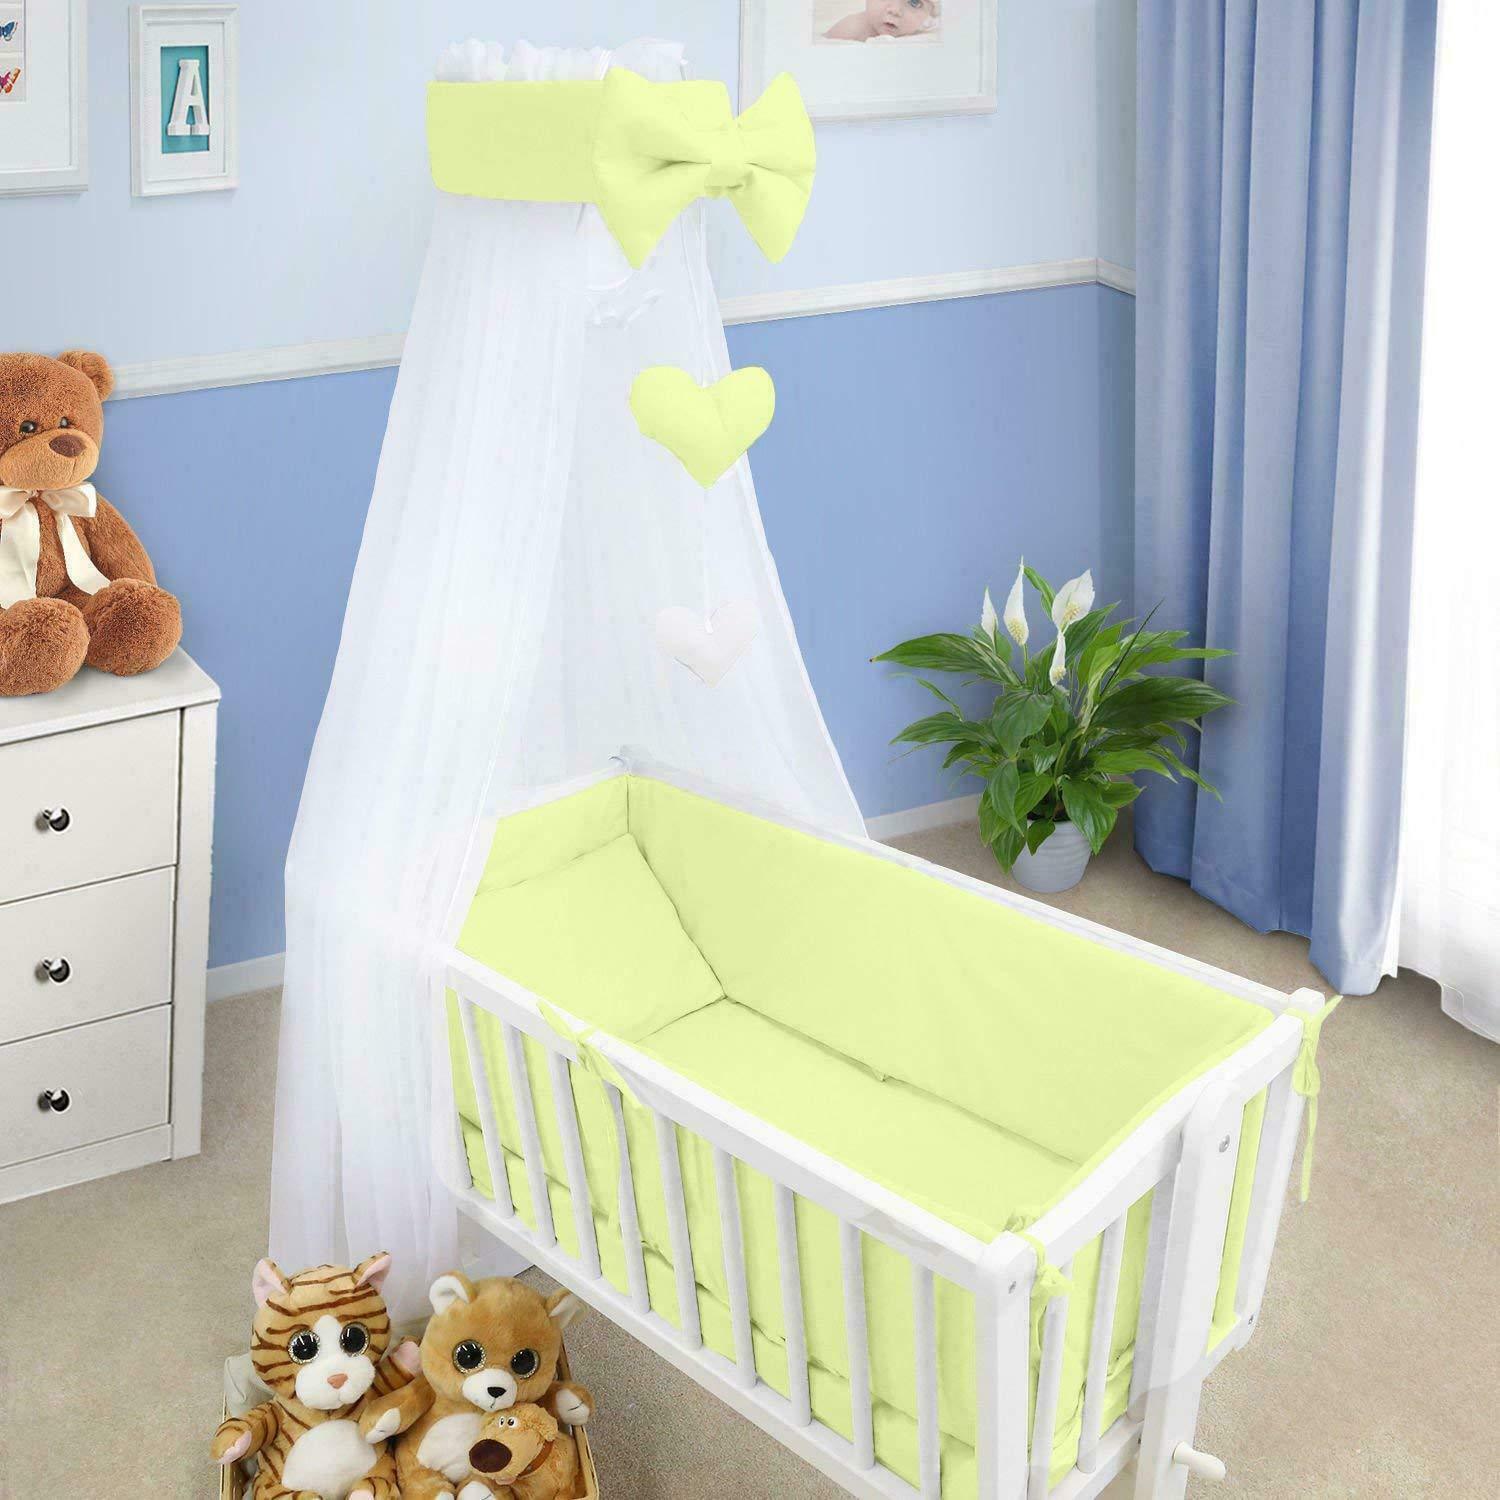 Baby Cot Bedding Set - 10 Piece Including Cot Bumper, Pillow, Duvet and Canopy to Fit 90x40cm Crib Green - 100% Cotton